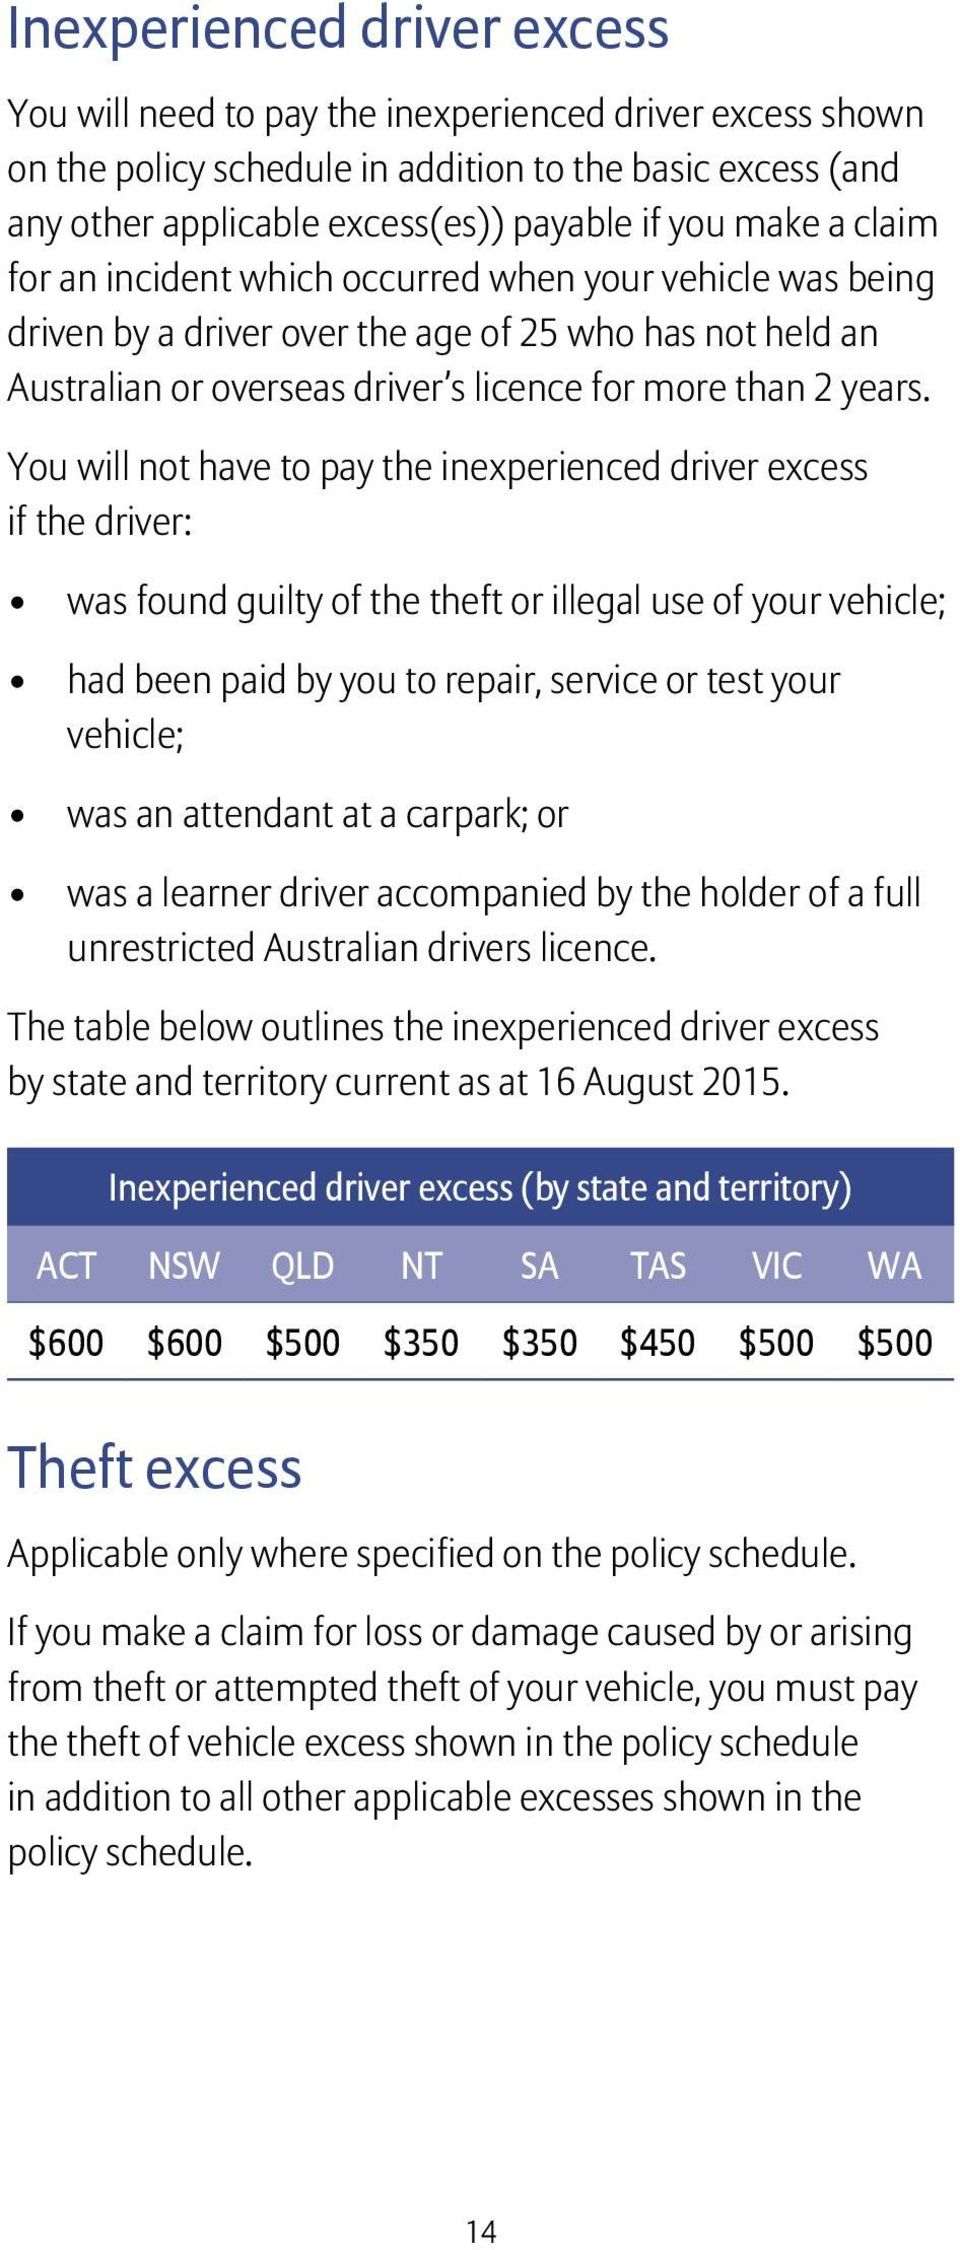 You will not have to pay the inexperienced driver excess if the driver: was found guilty of the theft or illegal use of your vehicle; had been paid by you to repair, service or test your vehicle; was